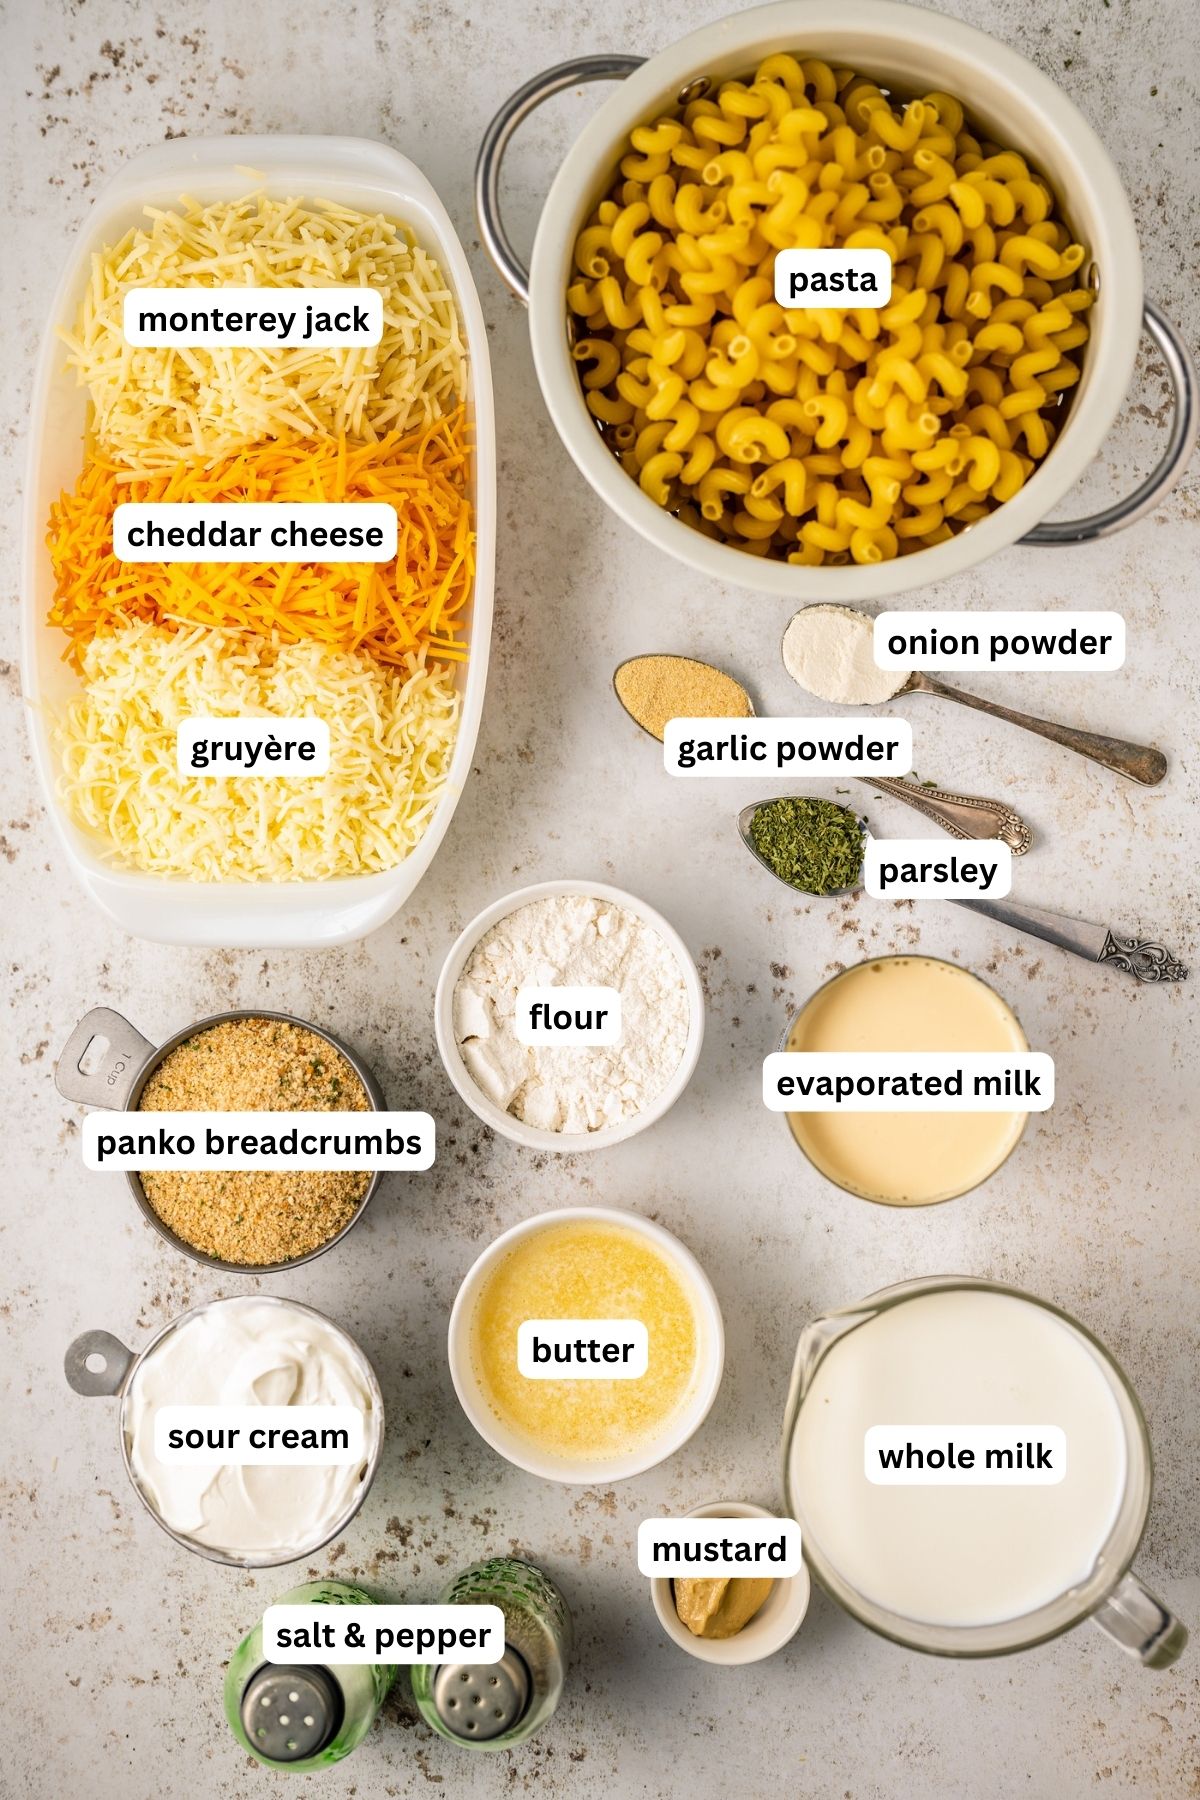 Ingredients in bowls for mac and cheese recipe, arranged from top to bottom: pasta, Monterrey jack cheese, cheddar cheese, gruyere cheese, onion powder, garlic powder, dried parsley, flour, Panko Breadcrumbs, evaporated milk, sour cream, butter, whole milk, mustard, salt and pepper.